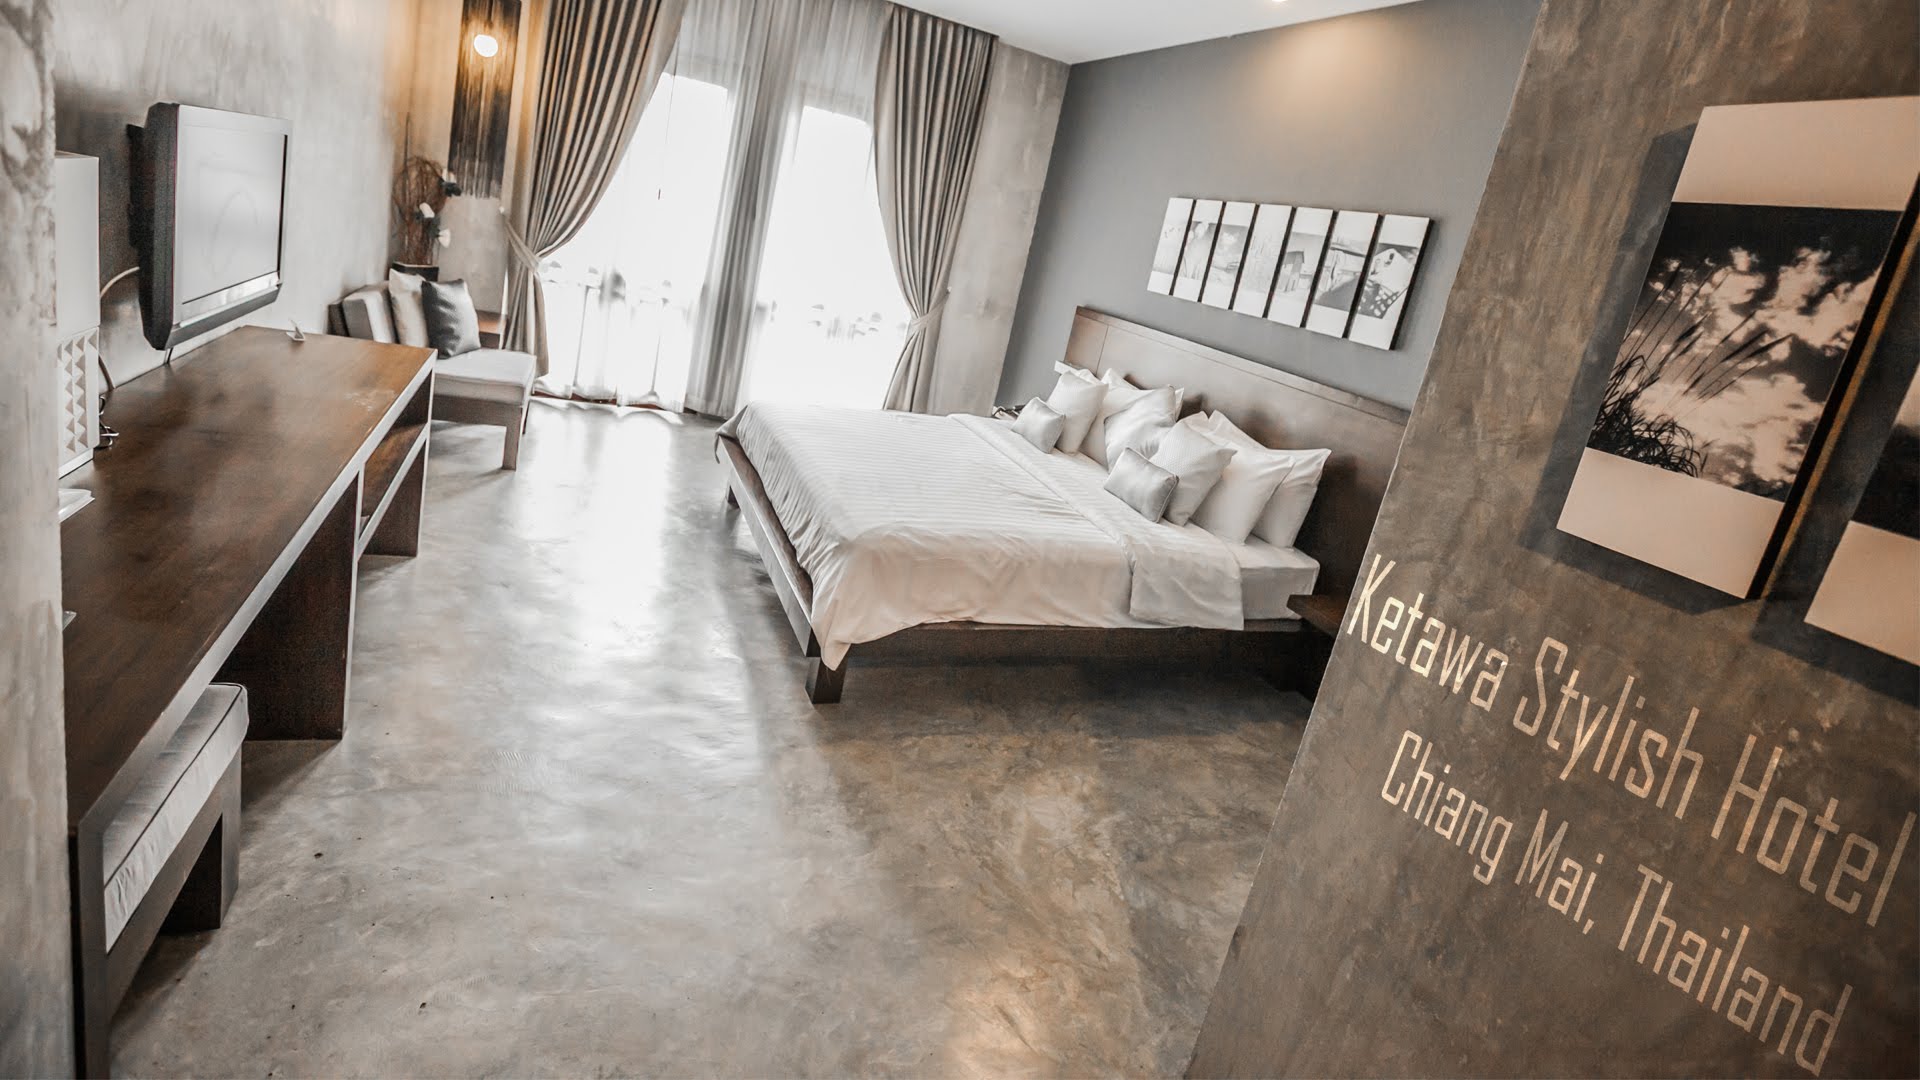 Read more about the article Ketawa Stylish Hotel Video Chiang Mai, Thailand